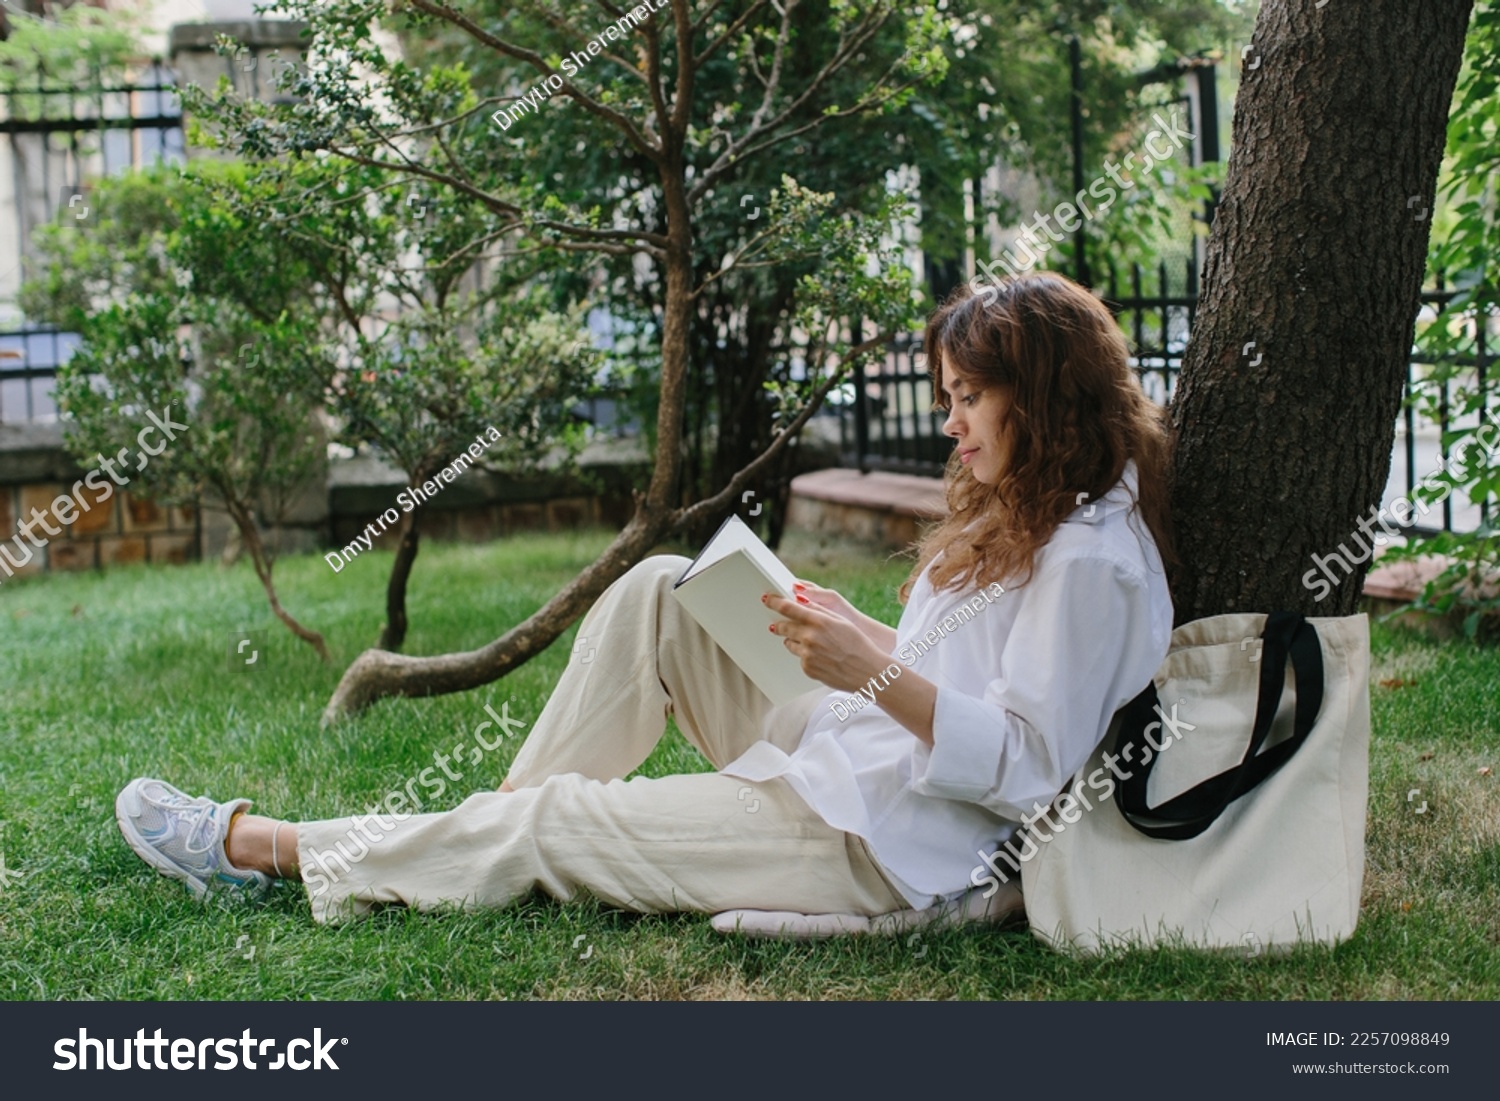 Magazine or book image mockup. The girl relaxes on the lawn in the courtyard of the coffee shop, reads a book. #2257098849